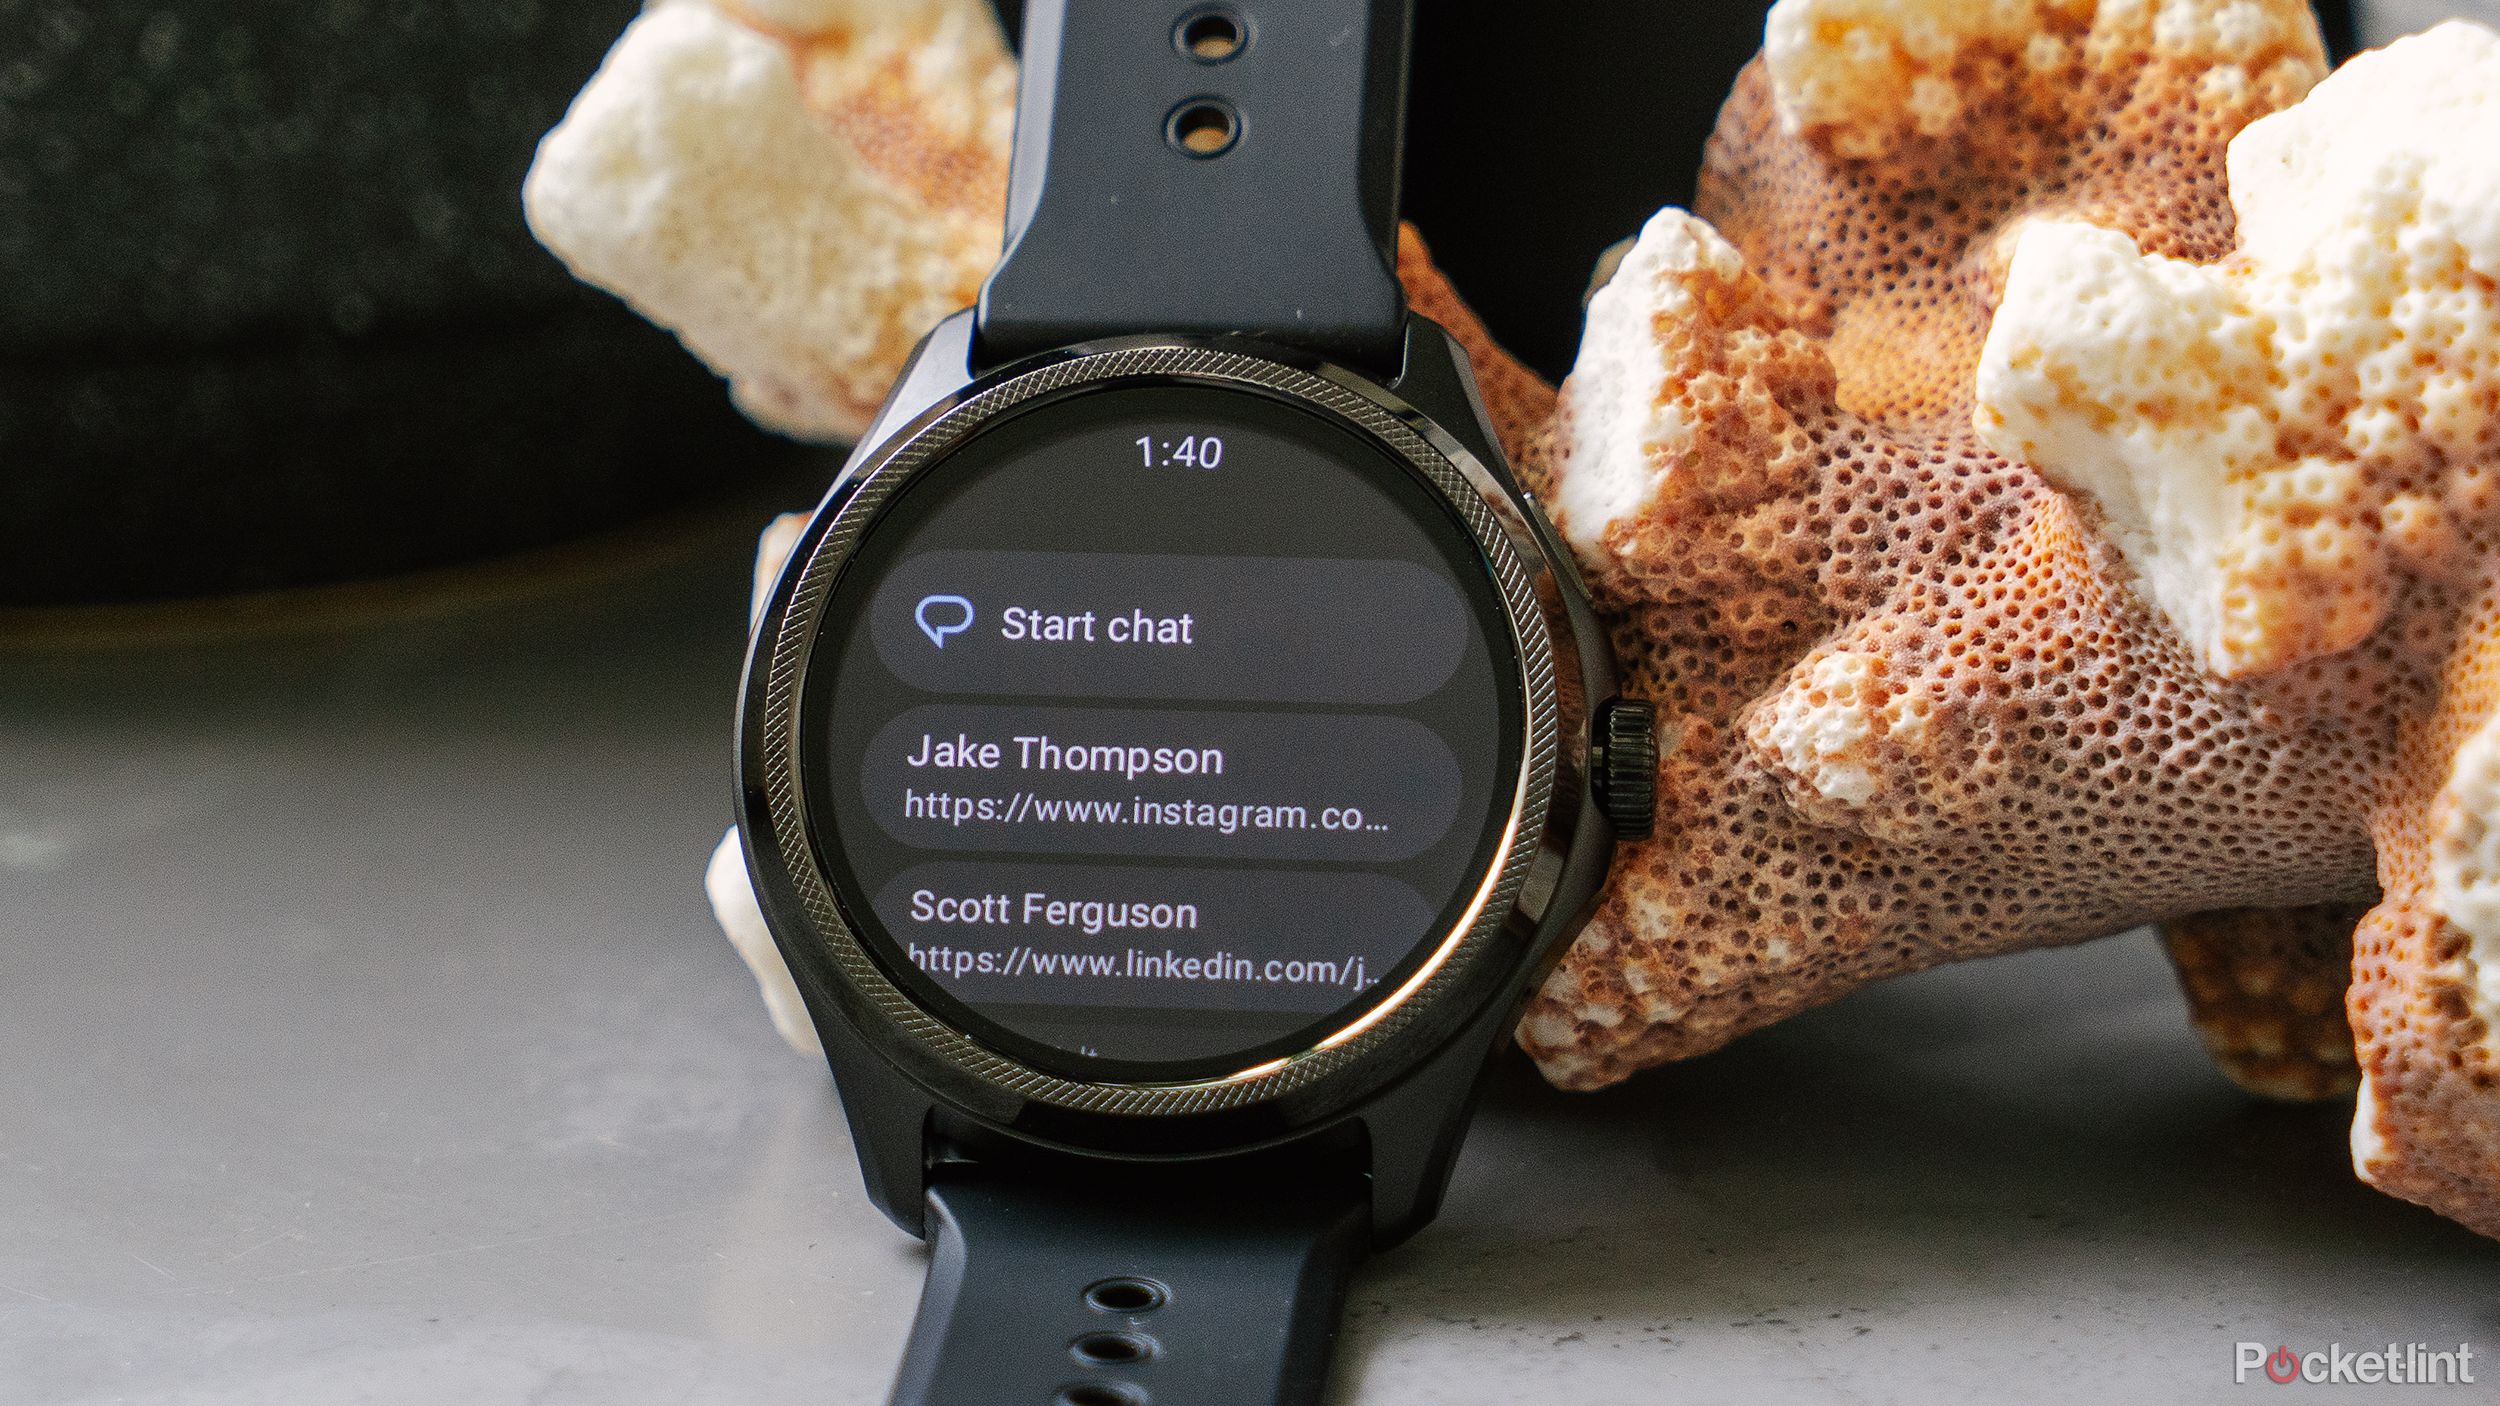 The Google Messages app is displayed on the TicWatch Pro 5.